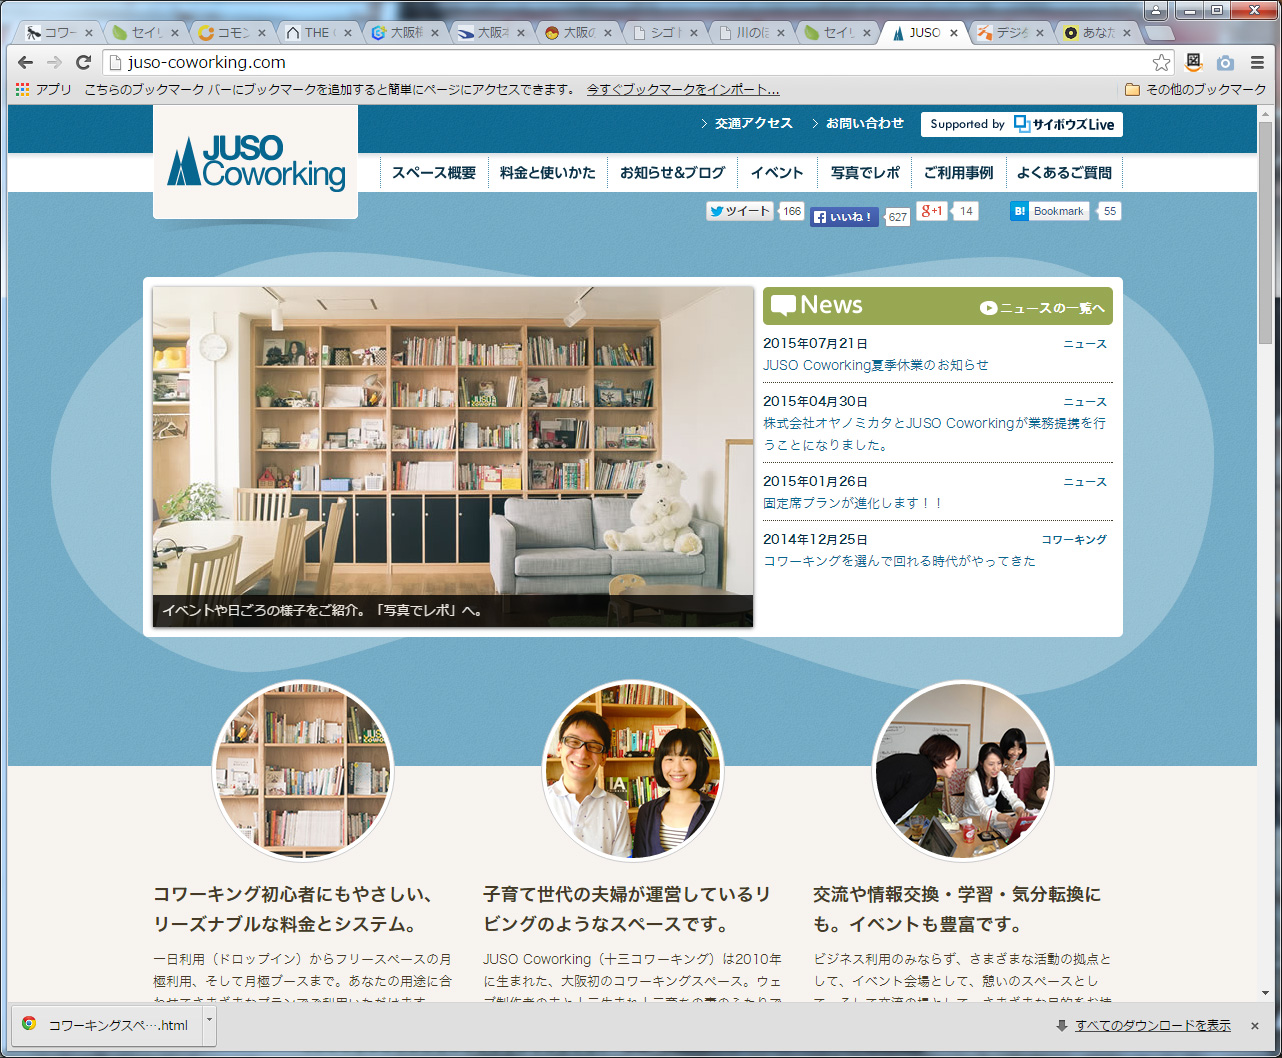 Juso-Coworking